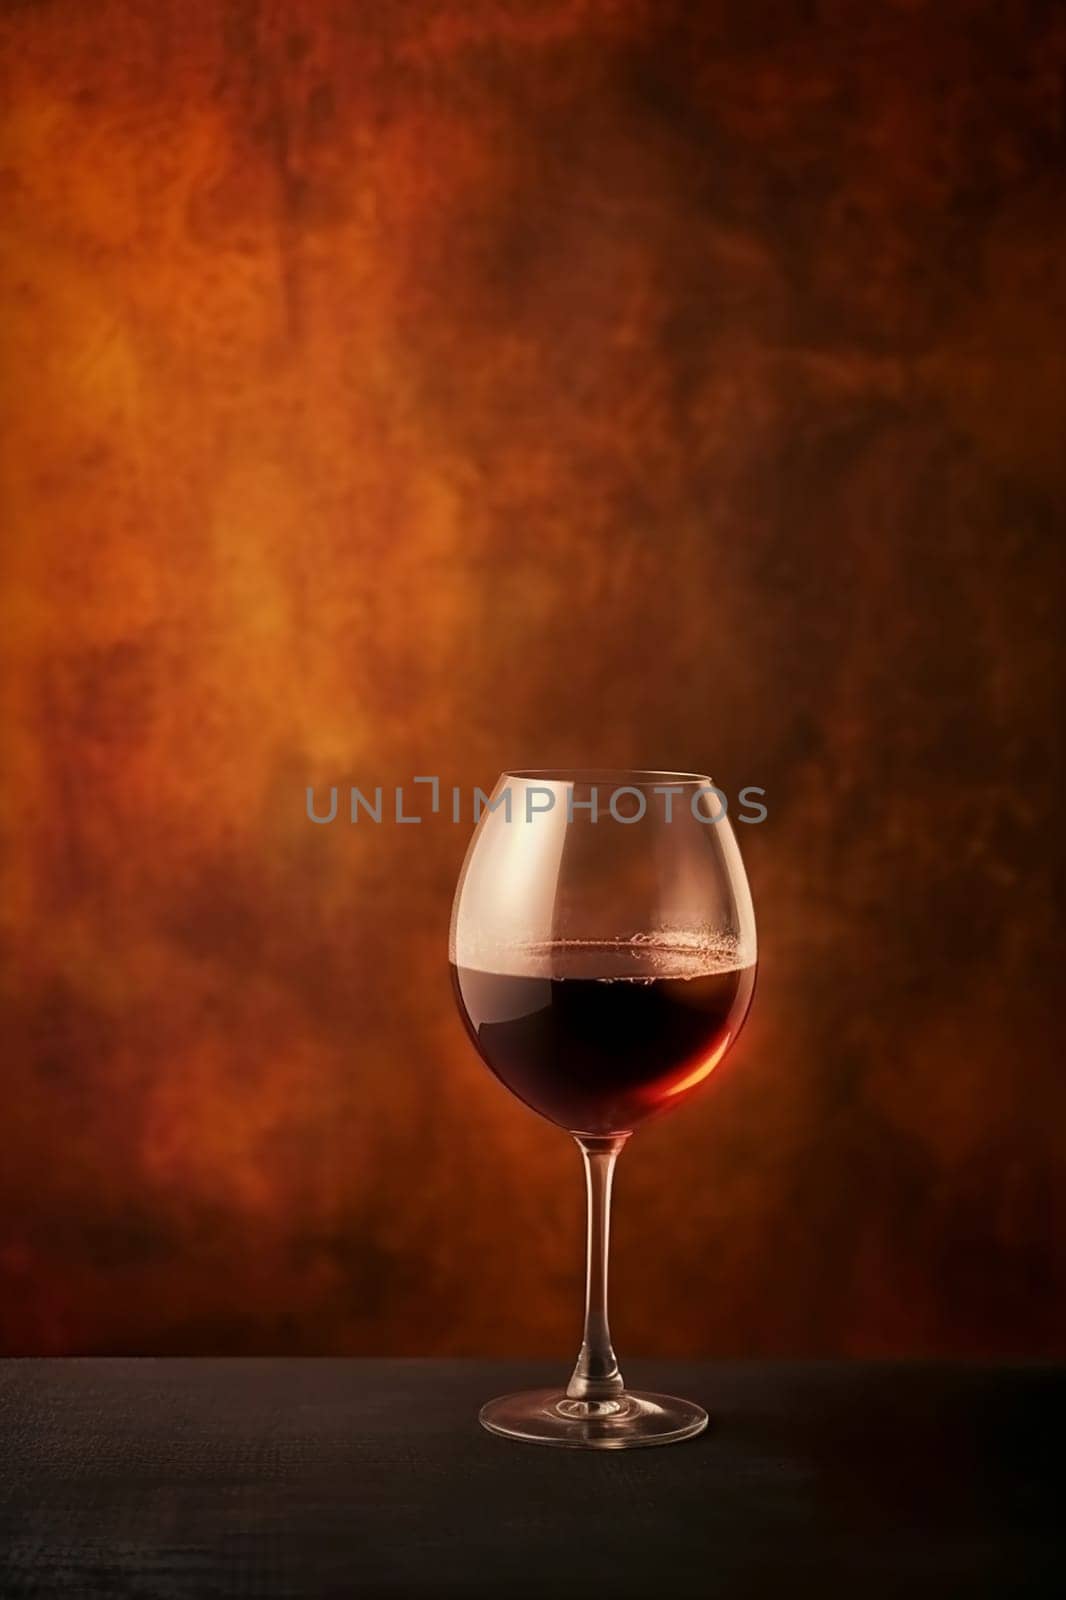 Elegant glass of red wine on a textured amber background